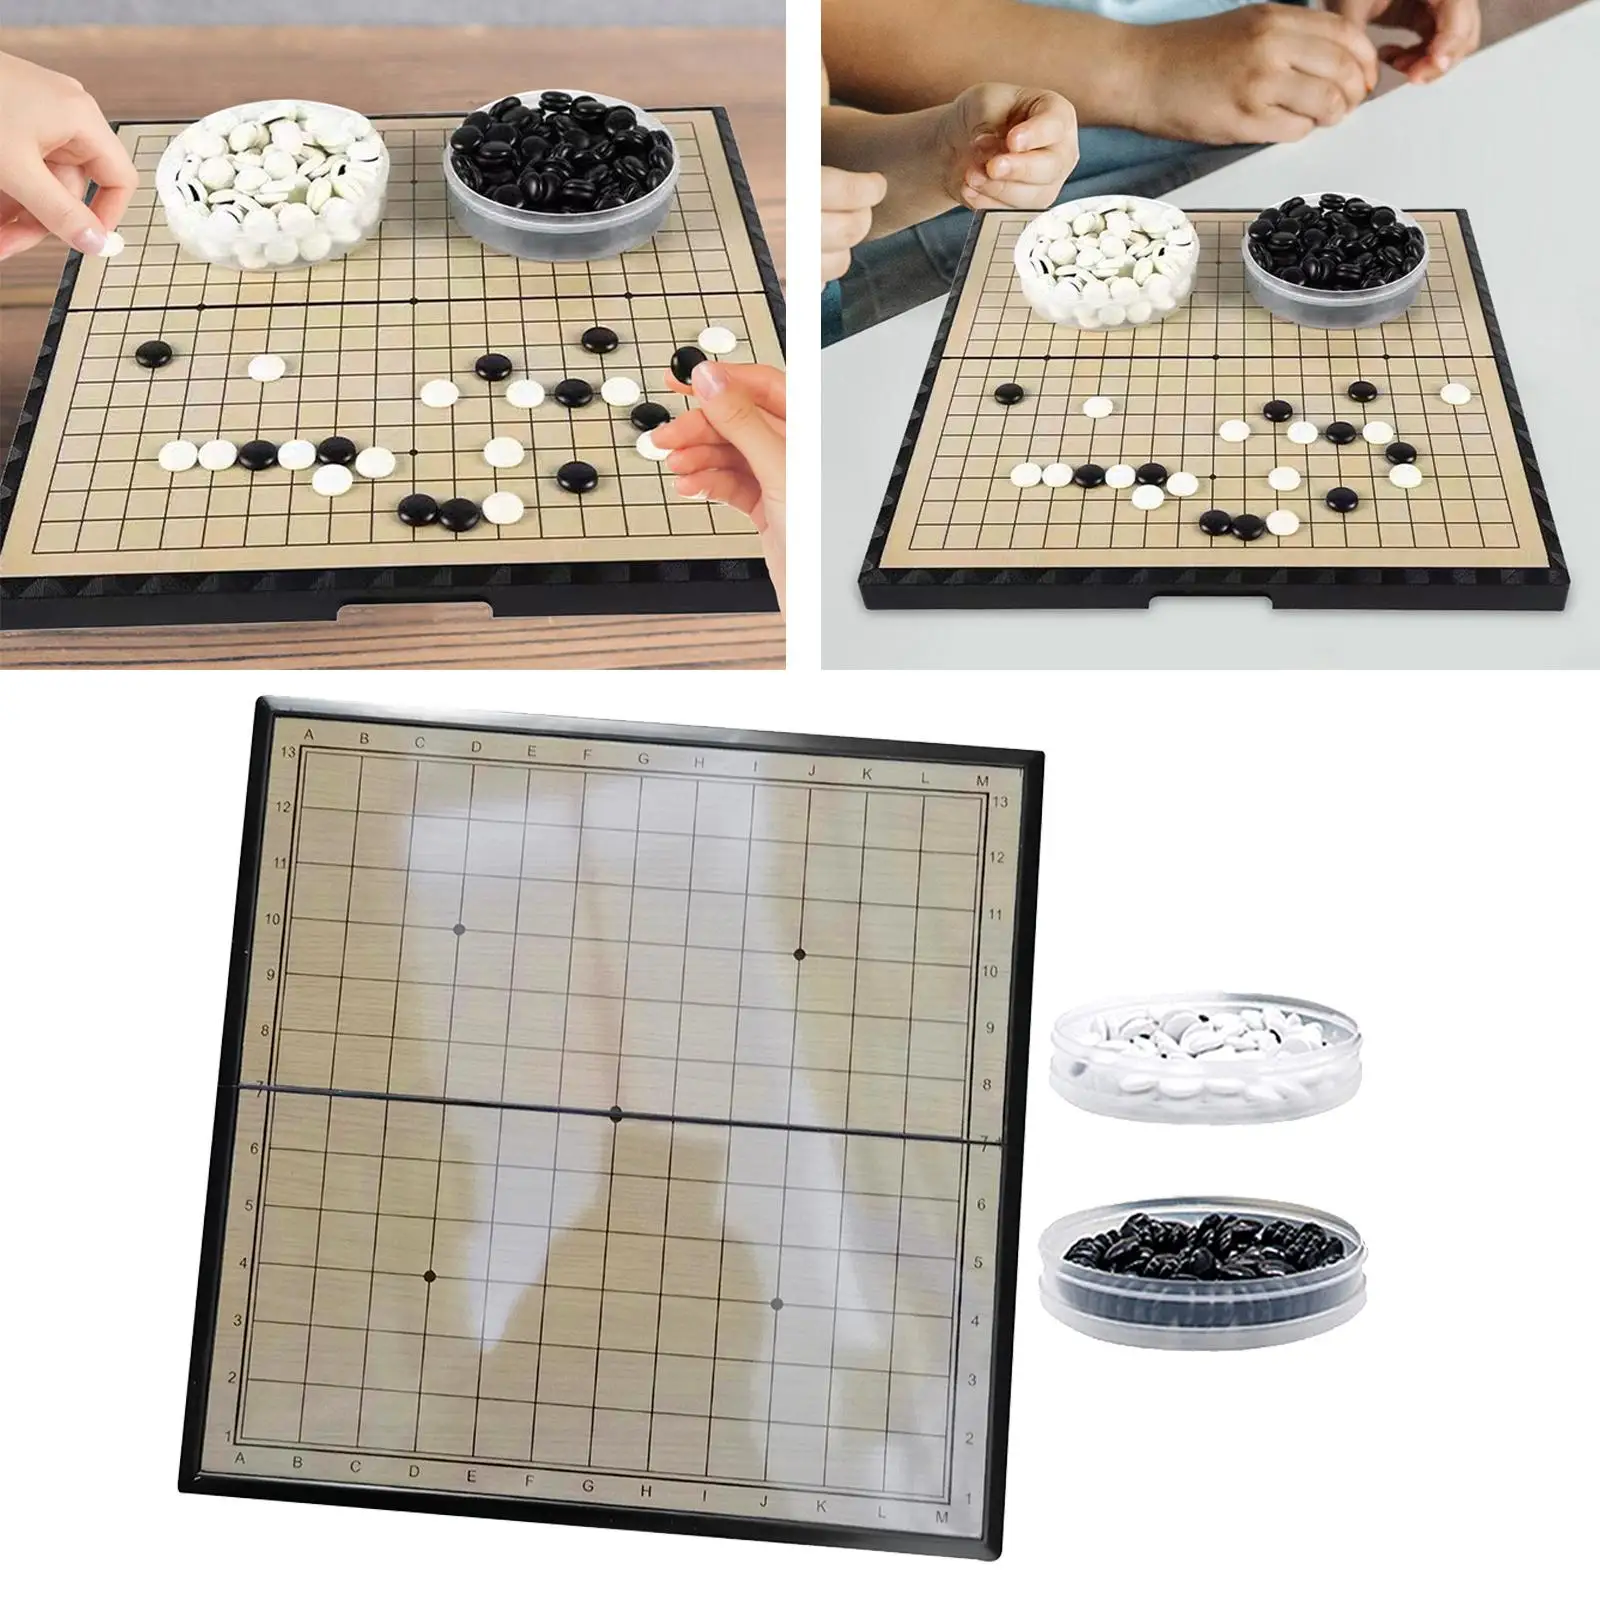 Go Chess Board Game Set Folding Portable Chinese Chess for Party Camping Outdoor Travel Gifts